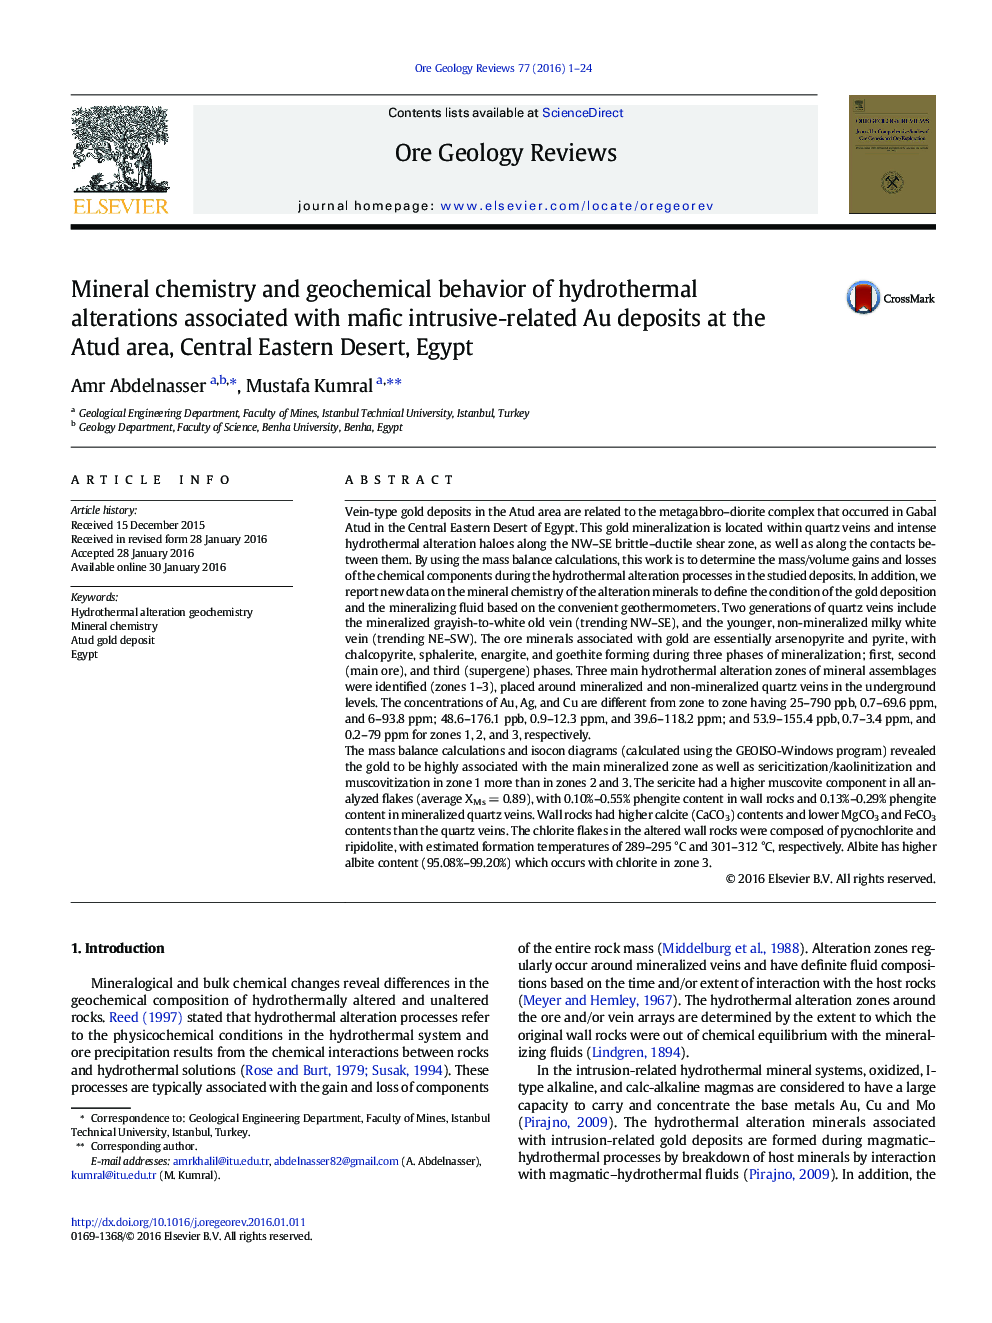 Mineral chemistry and geochemical behavior of hydrothermal alterations associated with mafic intrusive-related Au deposits at the Atud area, Central Eastern Desert, Egypt